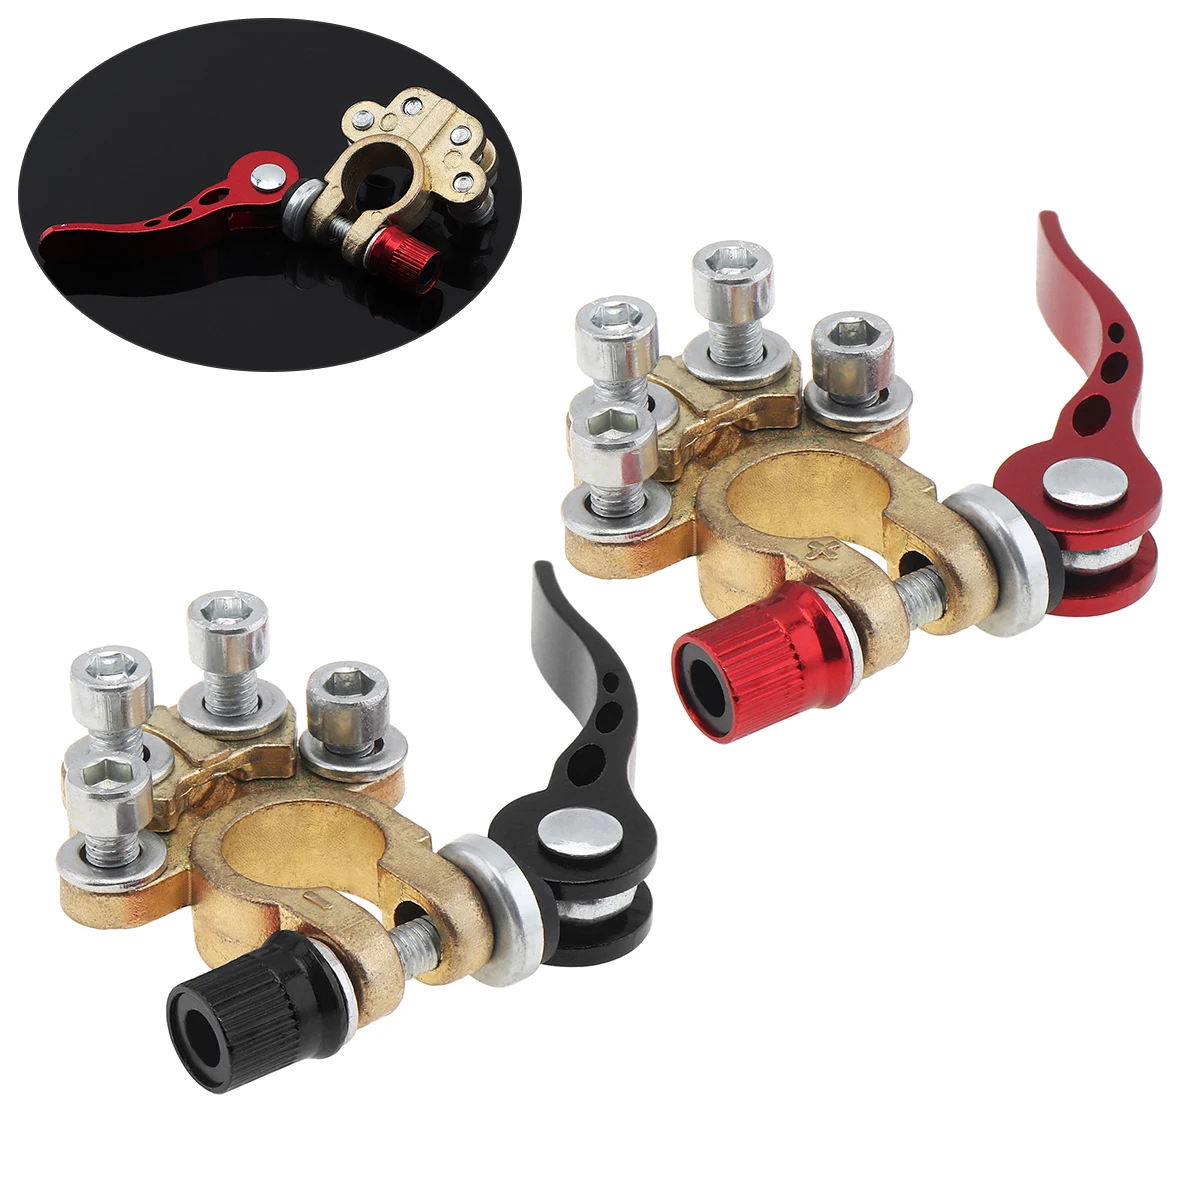 

2pcs 12V 1/2/3/4 AWG Gauge 4 Way Quick Release Battery Terminal Connectors Top Post Side with Spacer Shims for Car Motorcycle